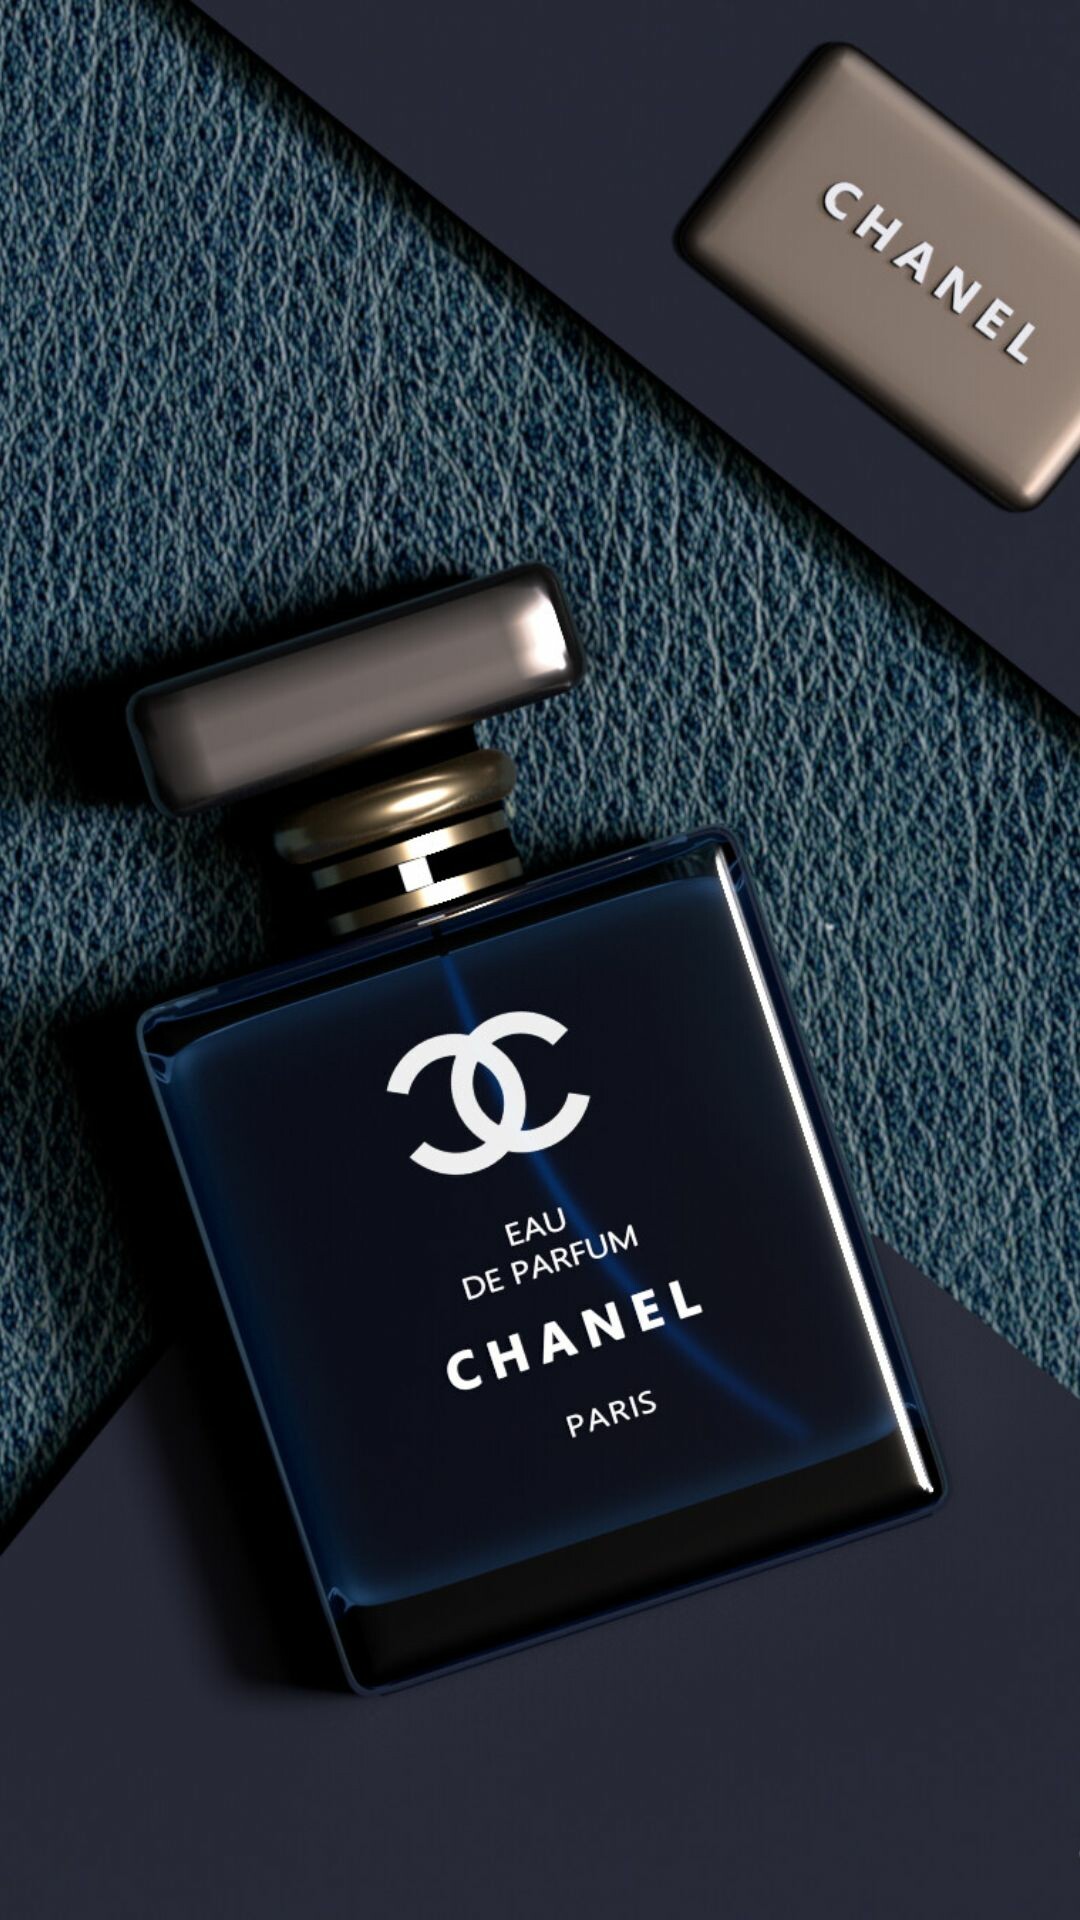 HD wallpaper, Chanel Wallpapers, Samsung Full Hd Chanel Wallpaper Photo, 1080X1920 Full Hd Phone, Best Chanel Backgrounds